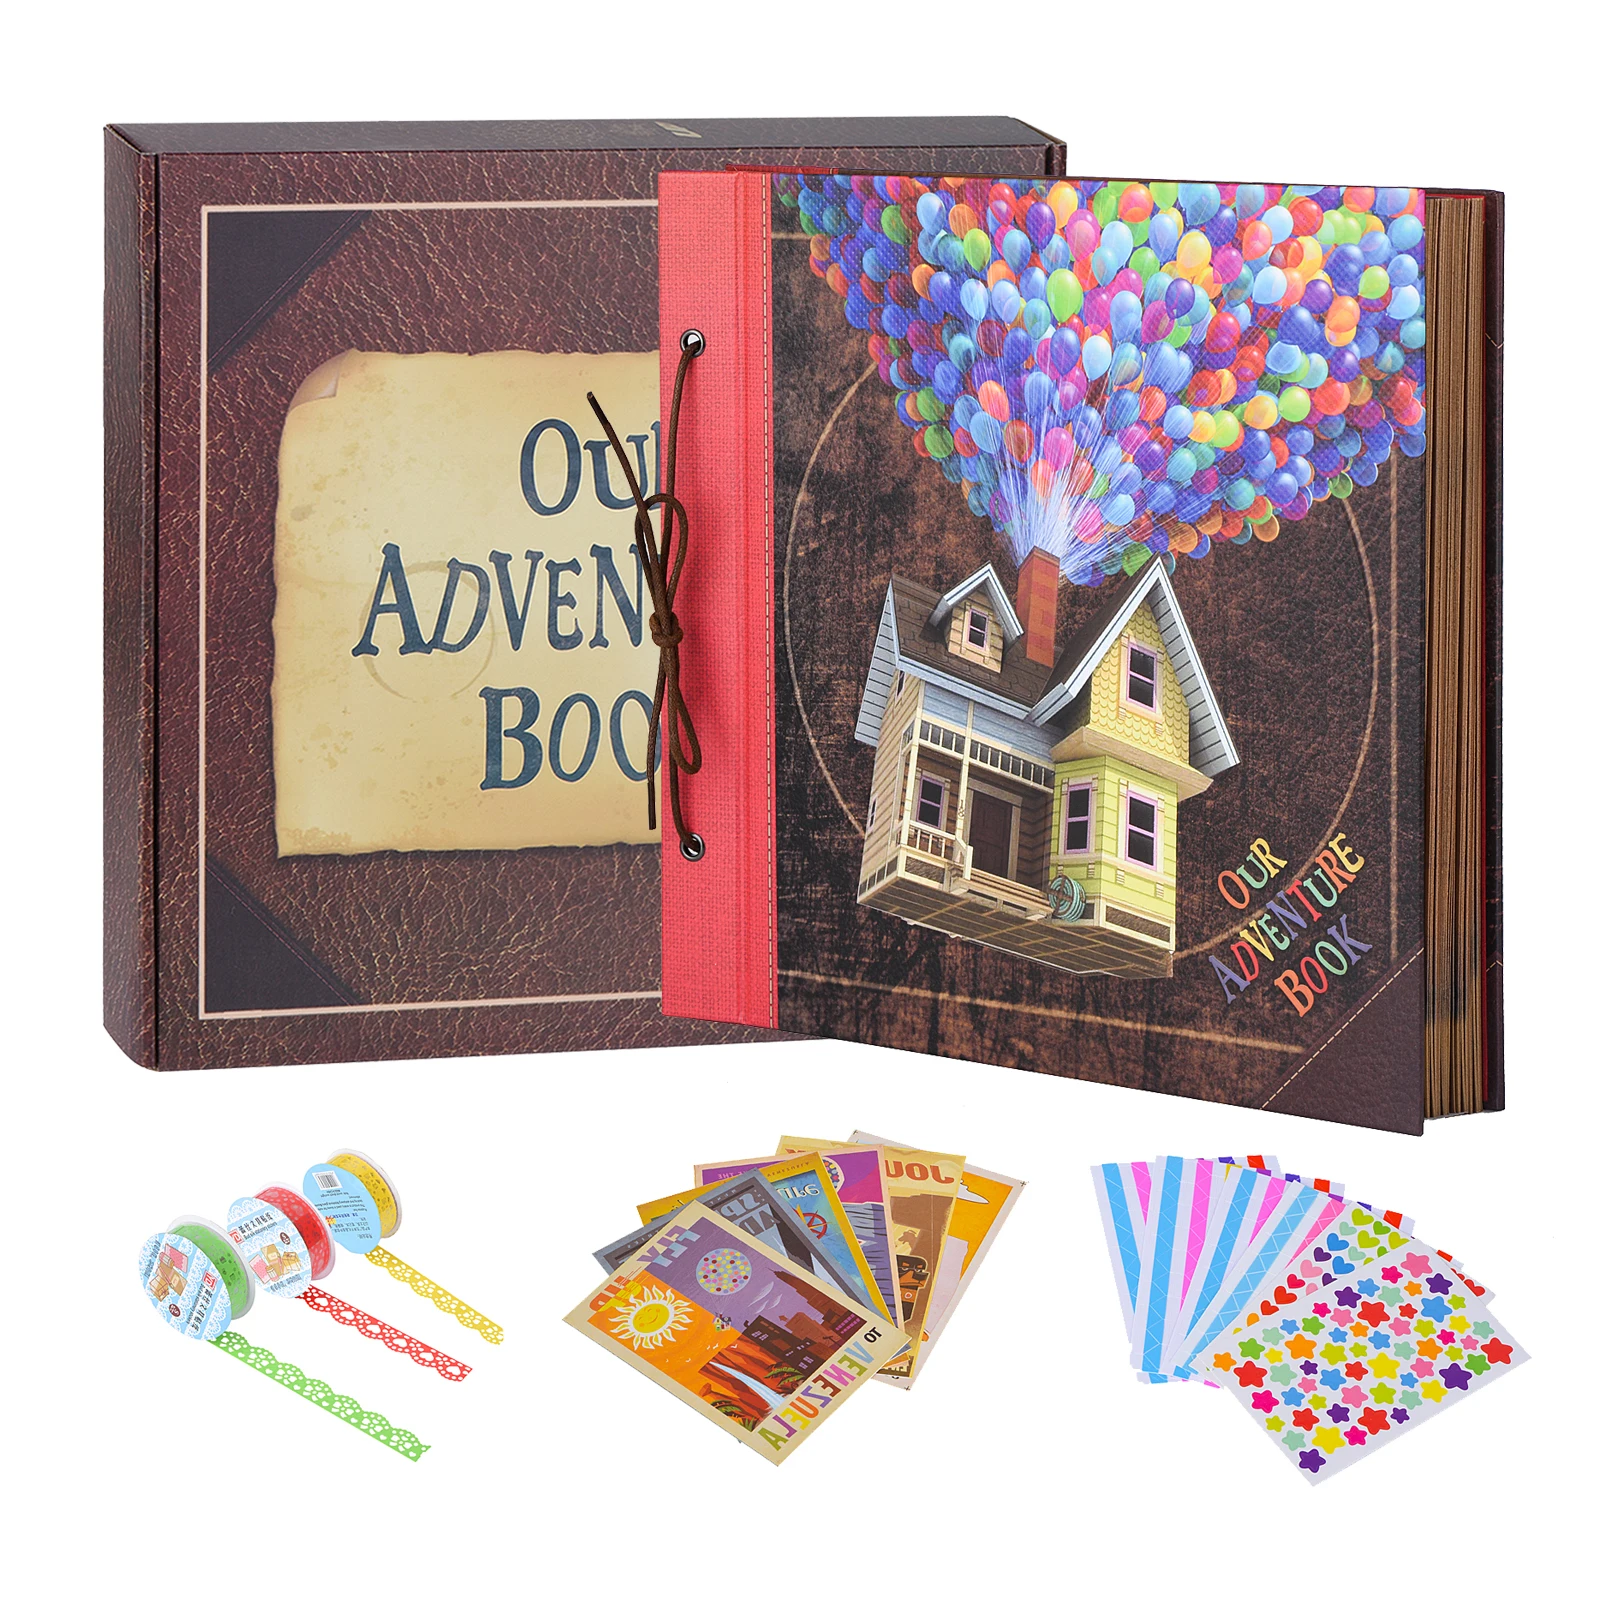 LINKEDWIN Our Adventure Book Up Scrapbook Album with Movie Themed